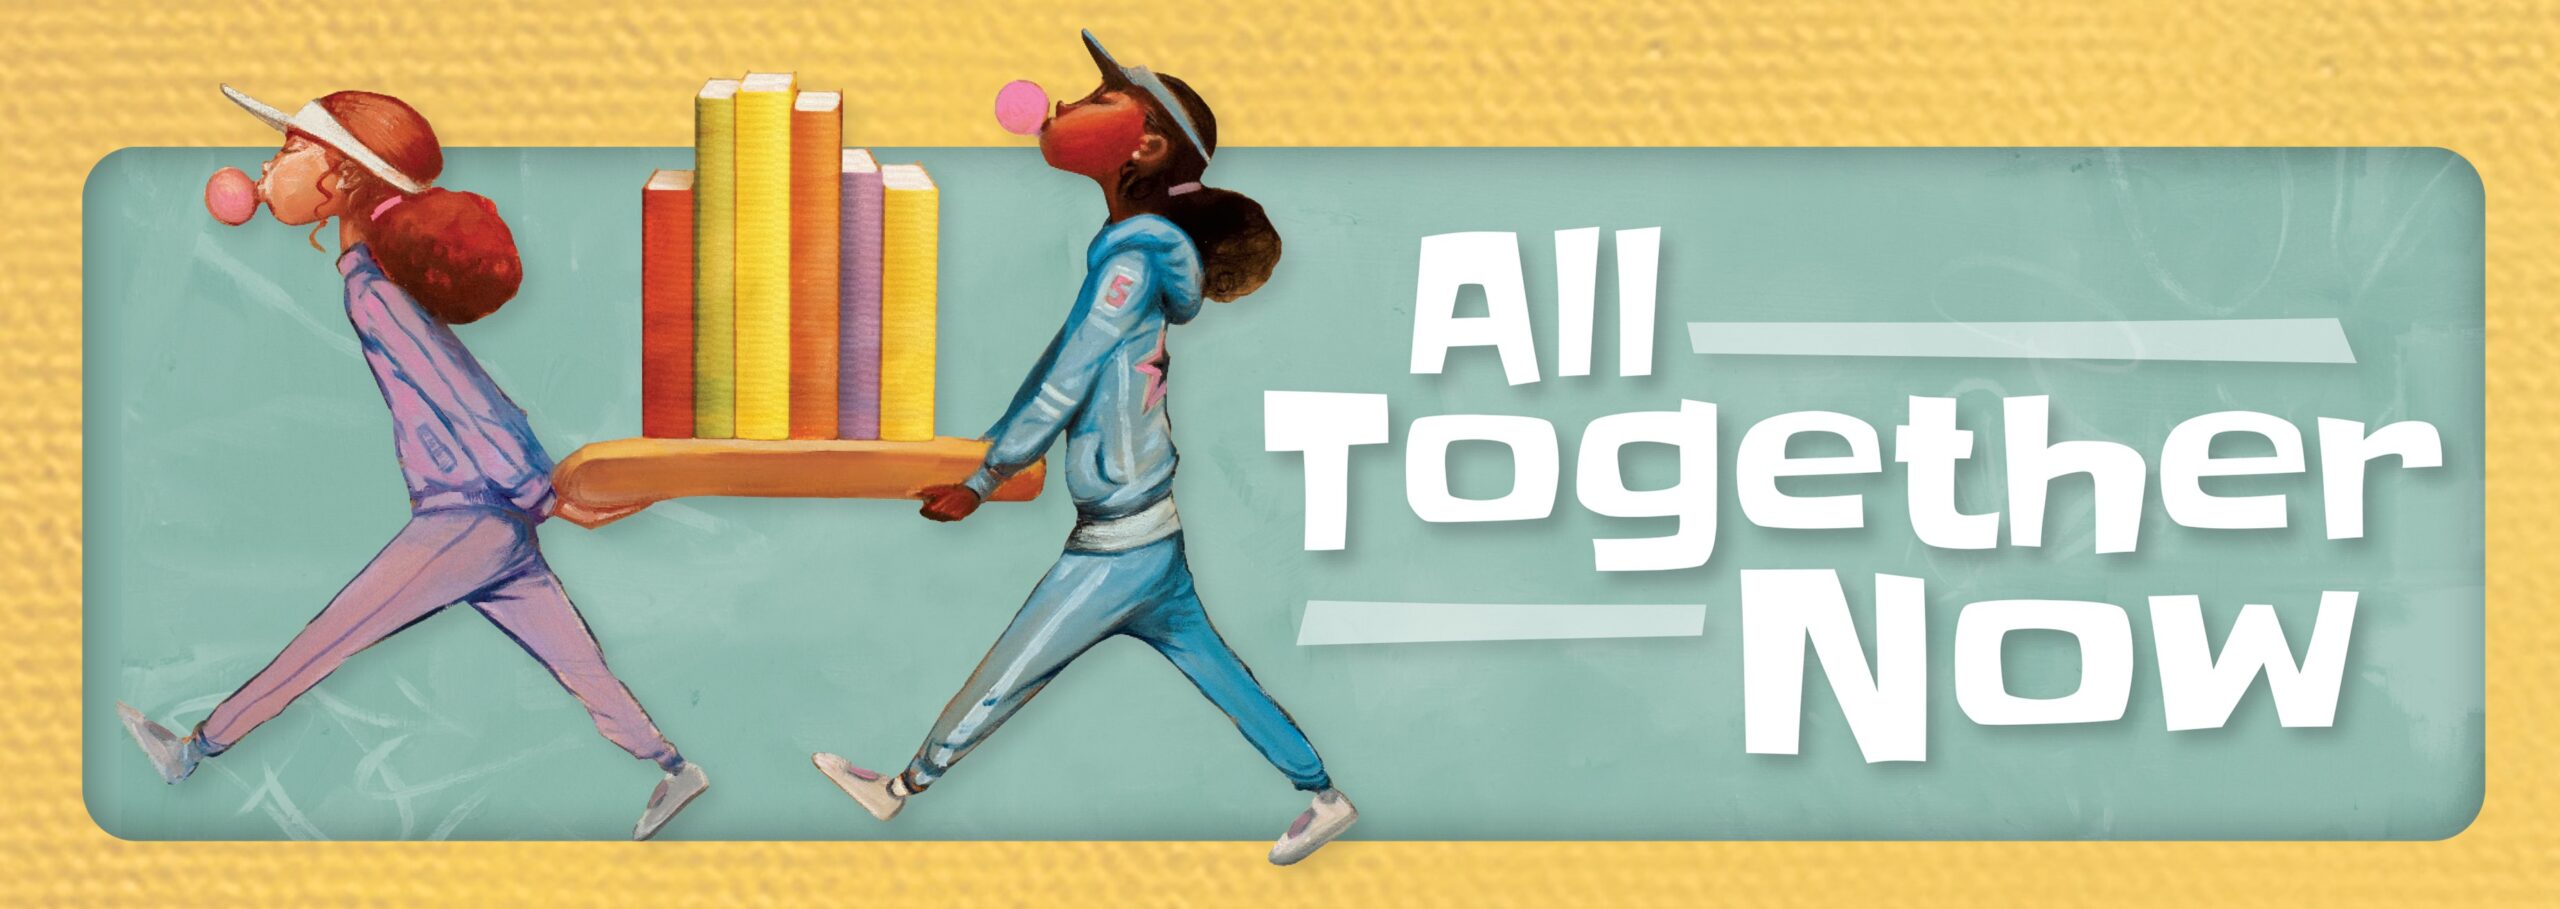 Two kids working together to carry a box of books with the words "All Together Now"